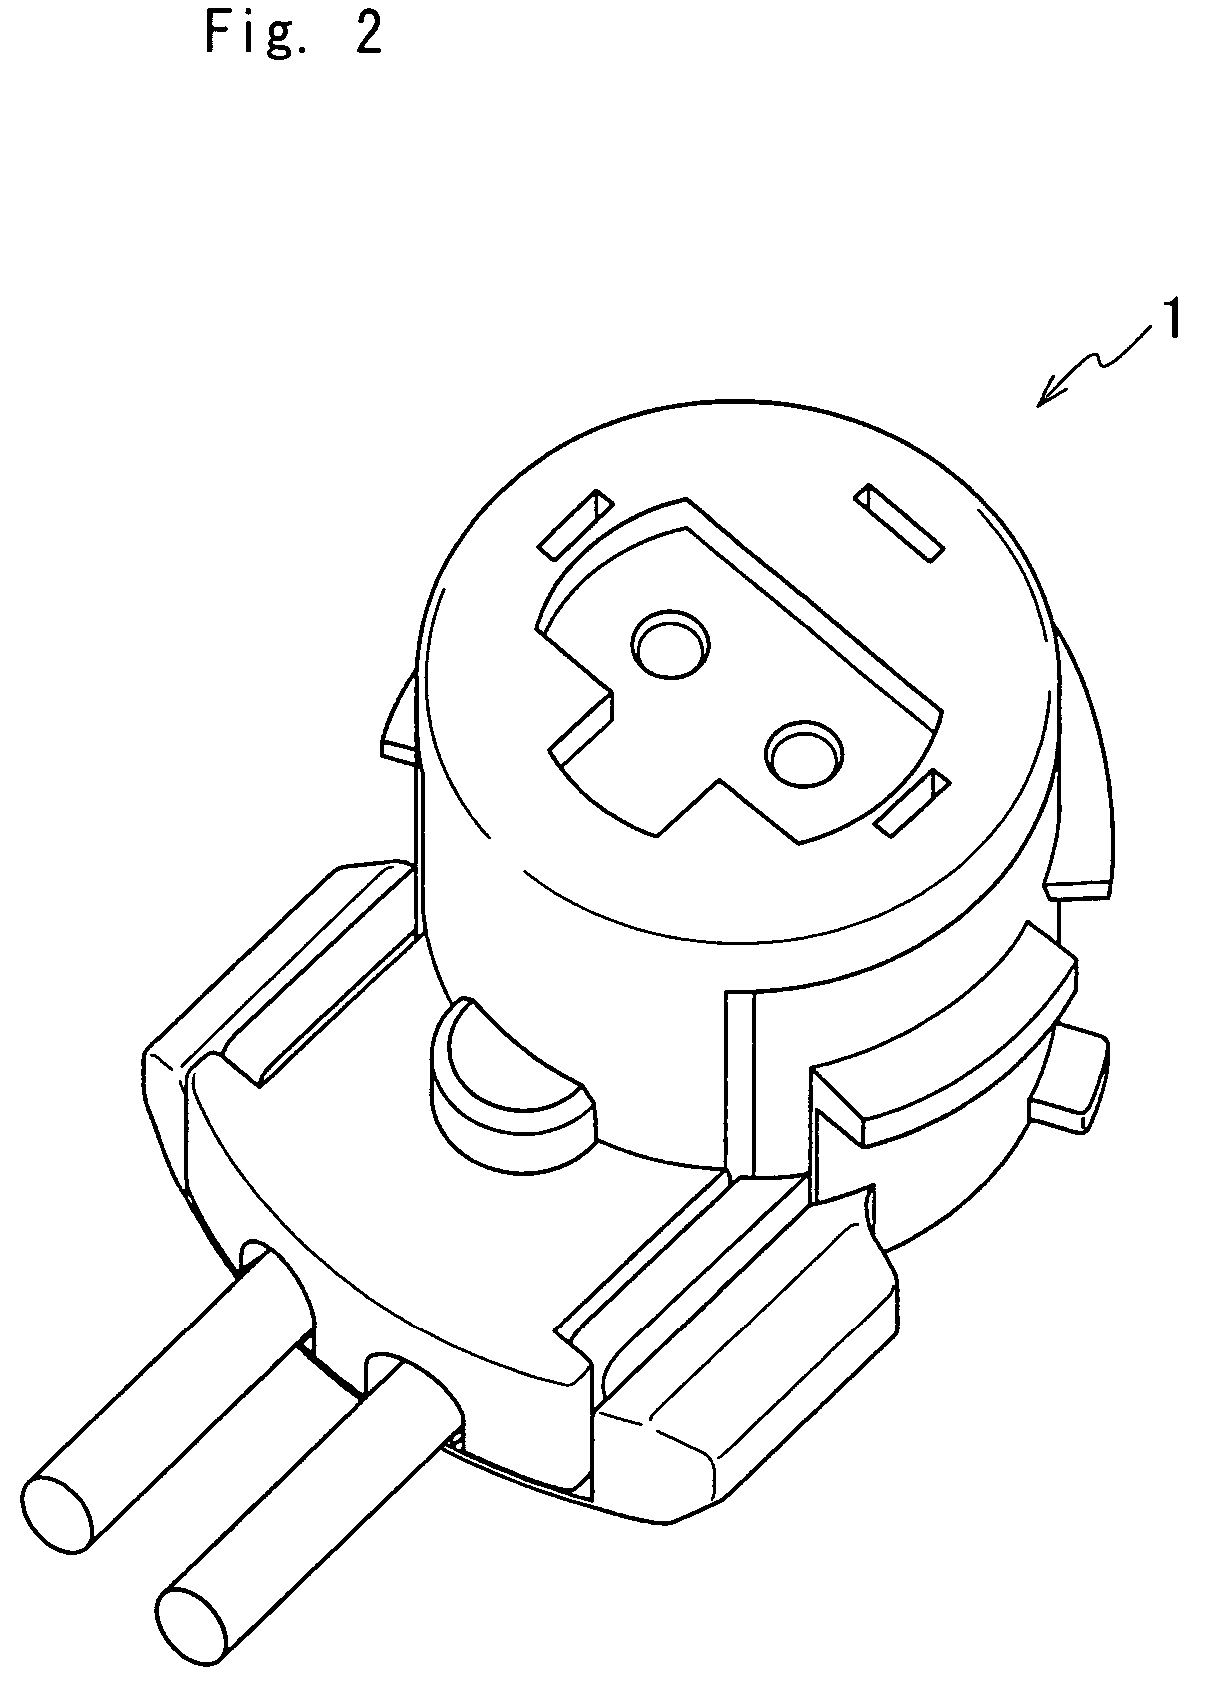 Electrical connecting device having a cover with a latch